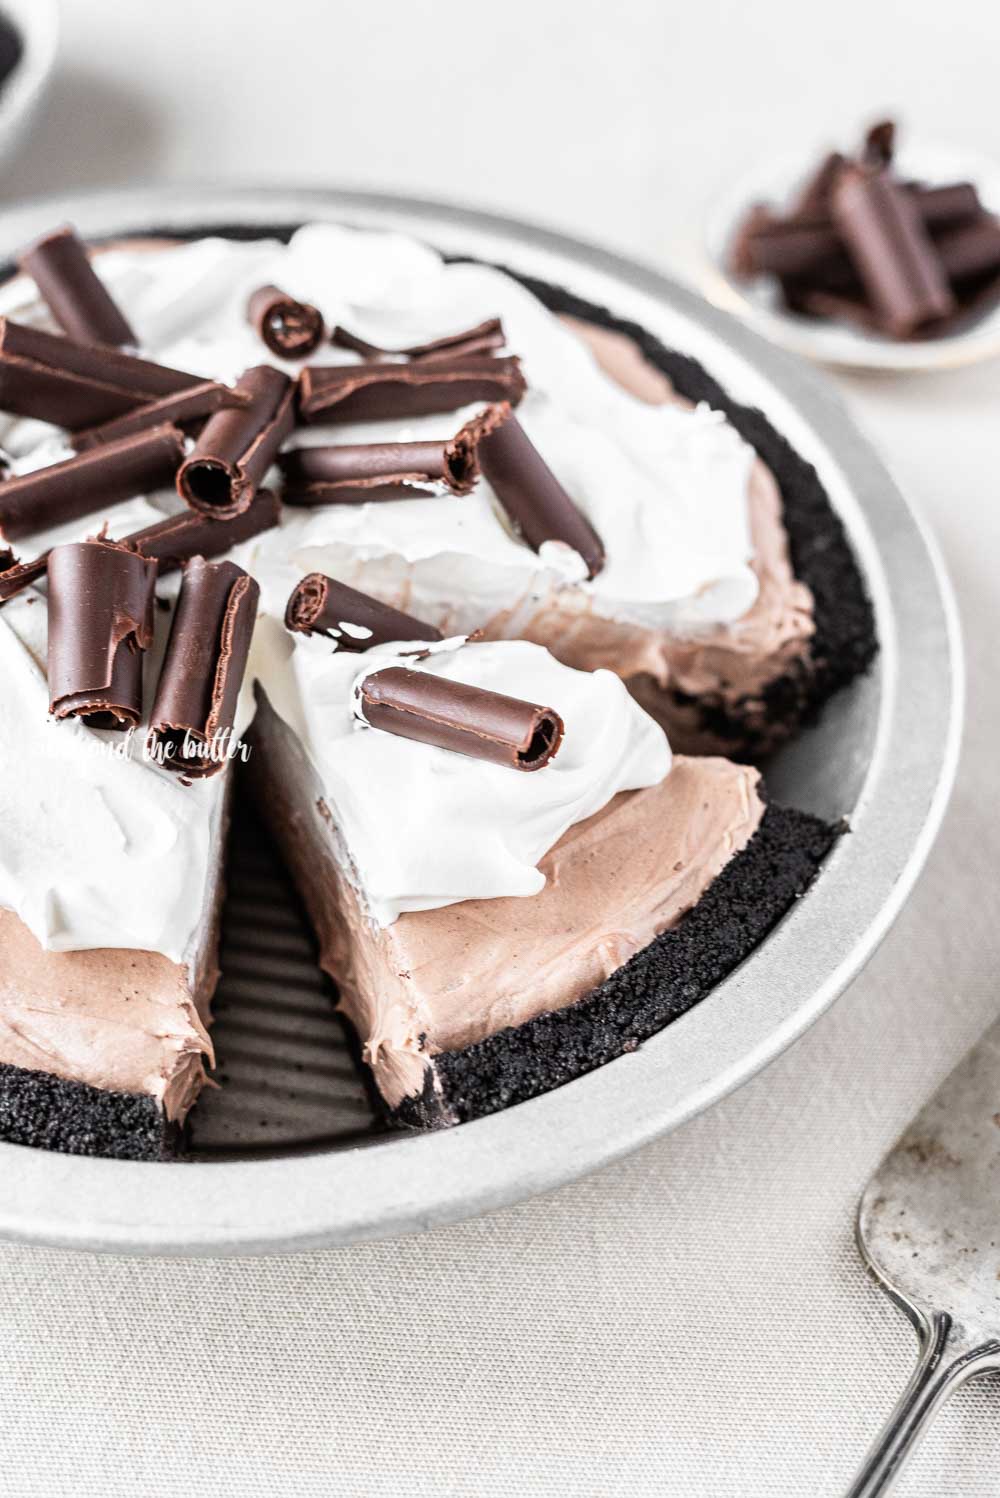 Angled image of sliced no-bake chocolate cream pie with chocolate wafer crust and garnished with Cool Whip and chocolate curls | All Images © Beyond the Butter™